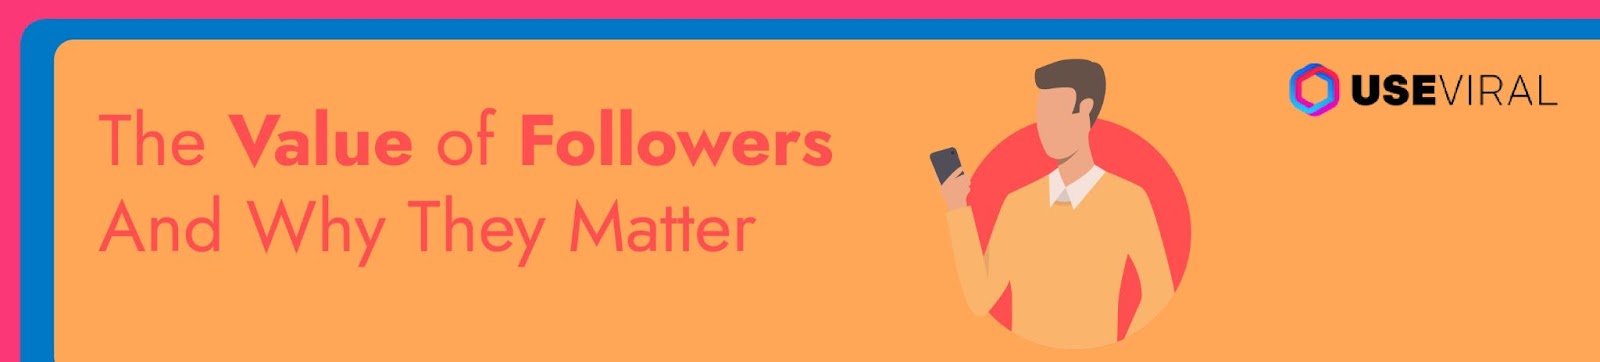 The Value of Followers And Why They Matter